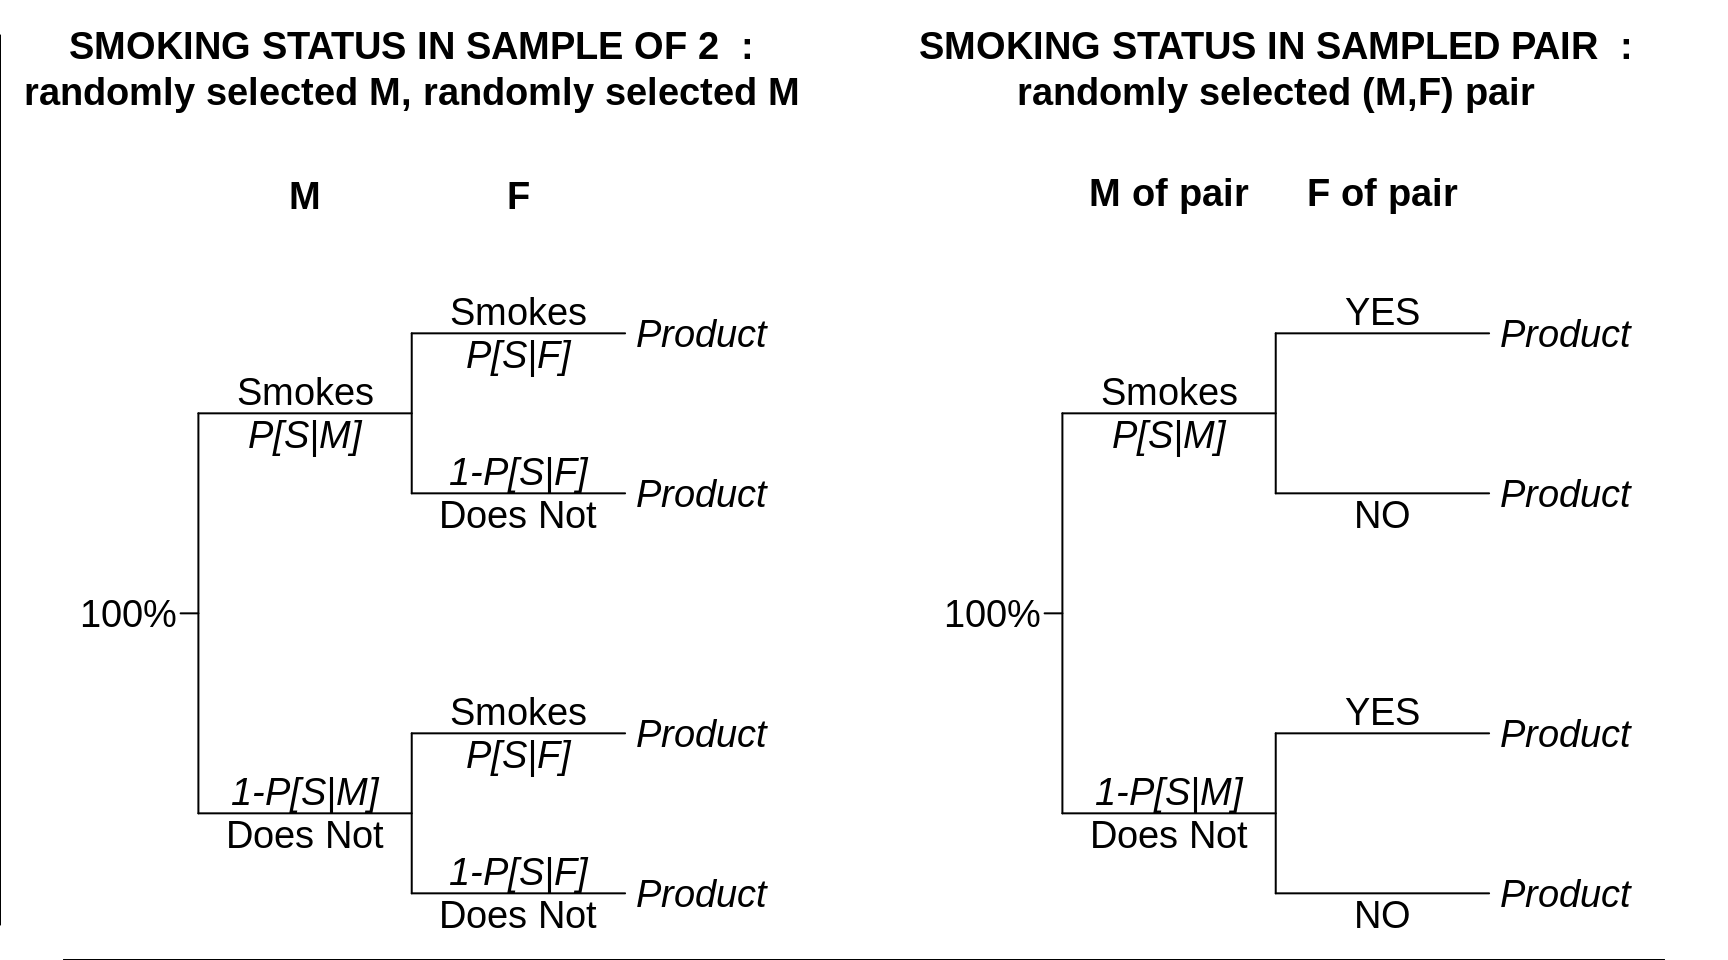 Another example of the difference between 'independent' and 'related' results. At issue is the composition of a make-female pair with respect to the number of sampled persons (out of $n$ = 2) that smoke (0, 1, or 2). **Left**: the pair are formed **at random**, the Male selected randomly from all adult males, and the Female selected randomly from all adult females. Prob that F smokes is not realted to whether M does or does not. **Right**: a (**related**) M:F **couple** is selected from among all M:F couples,  'F, M+' denotes a Female whose M partner does smoke, and 'F, M-' denotes a Female whose M partner does not. These probabilities that these 2 types of Females smoke will differ from each other.